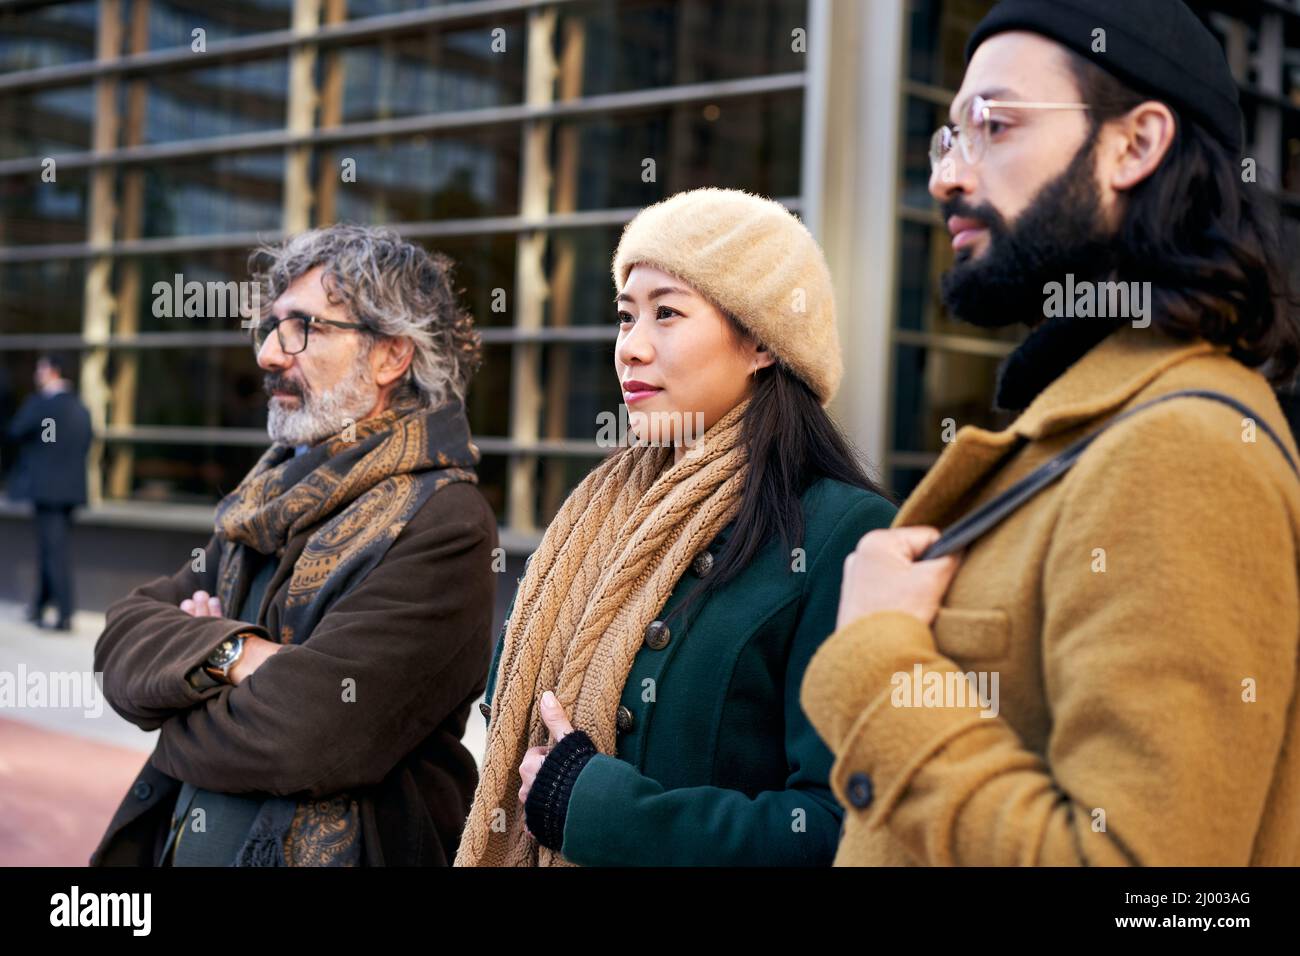 A multi-ethnic group of three people of different ages in a business center posing for a photo. Stock Photo